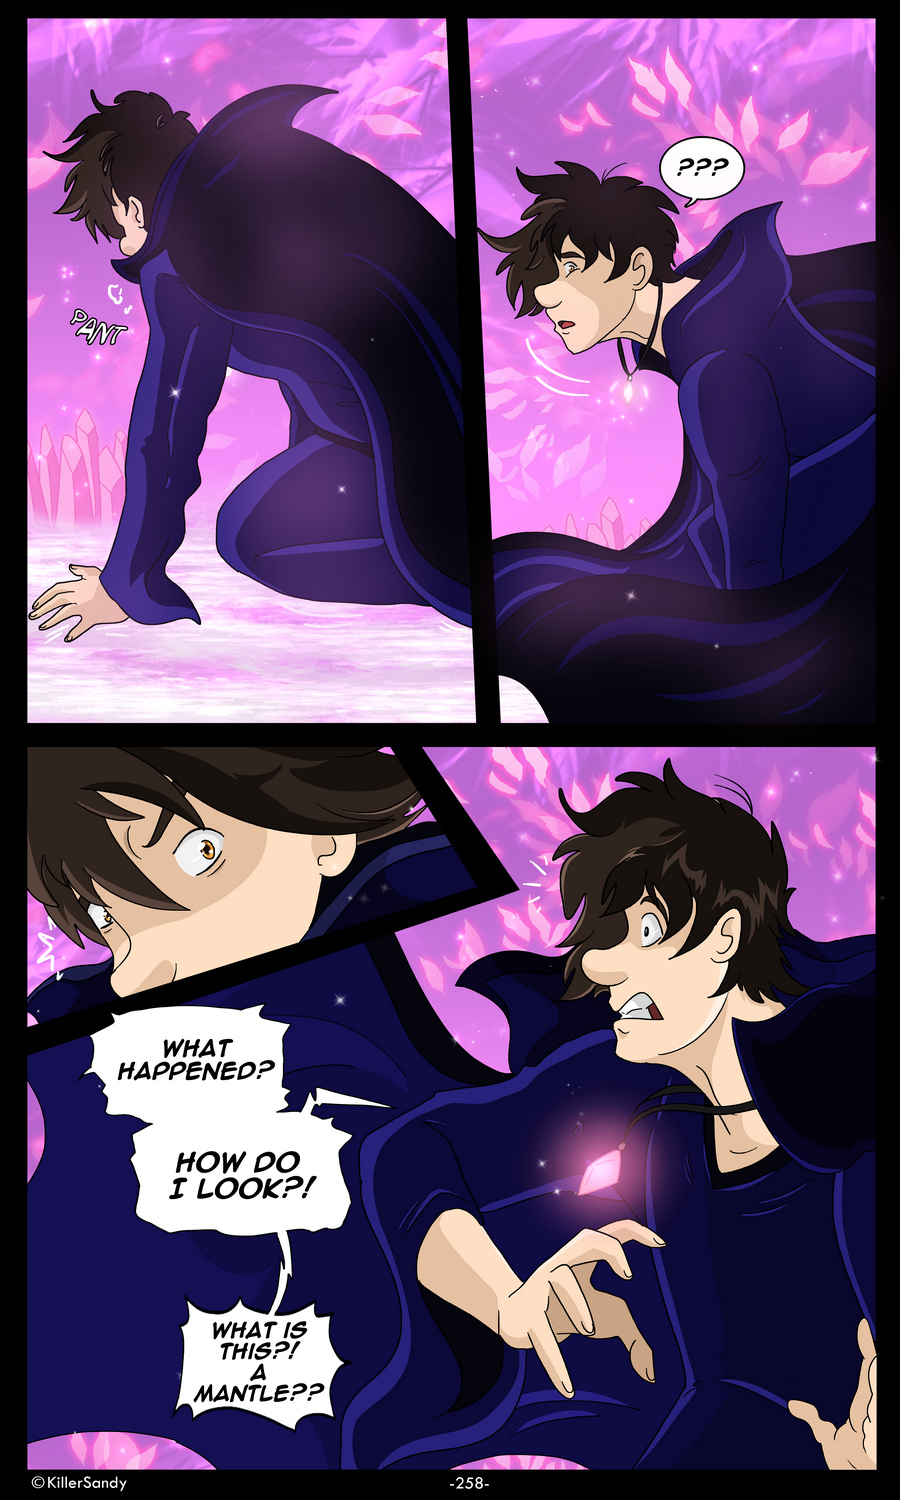 The Prince of the Moonlight Stone page 258